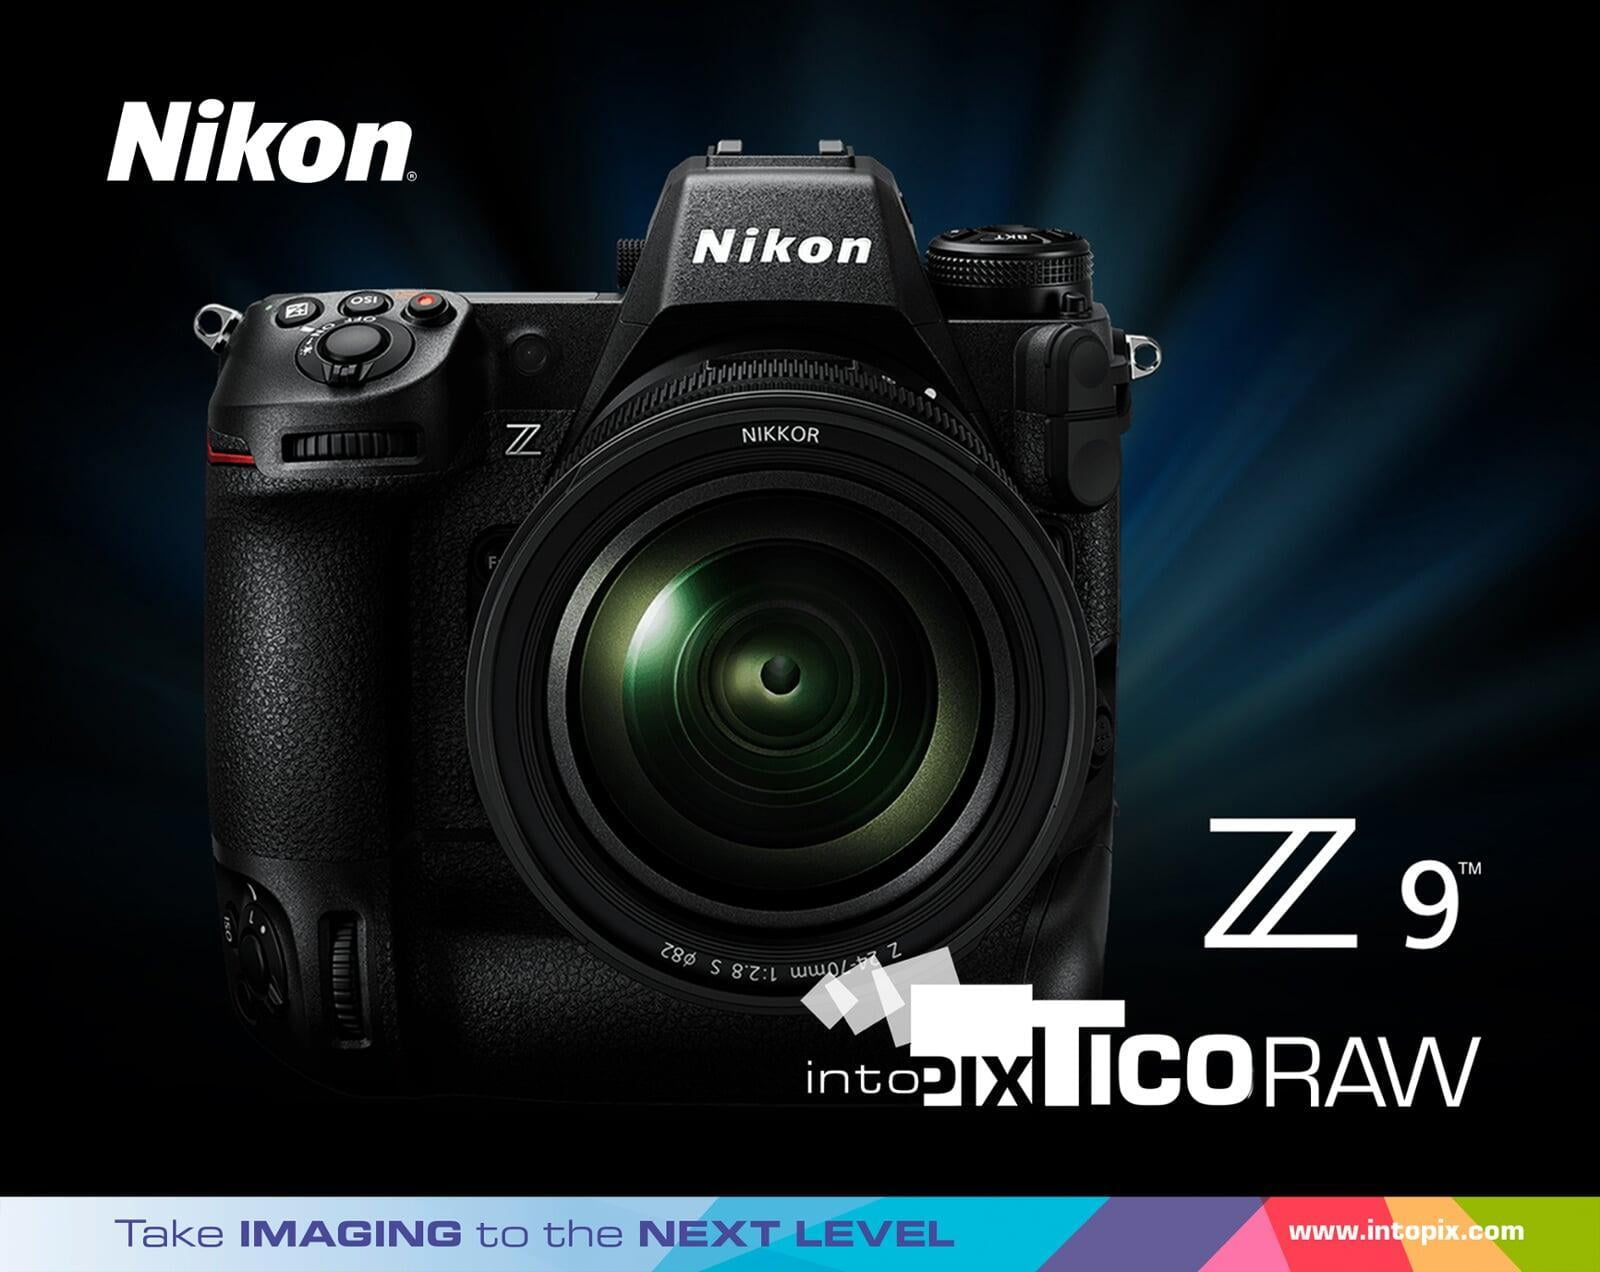 intoPIX TicoRAW Technology Added with High-Efficiency RAW Recording of Nikon Z 9 Flagship Mirrorless Camera